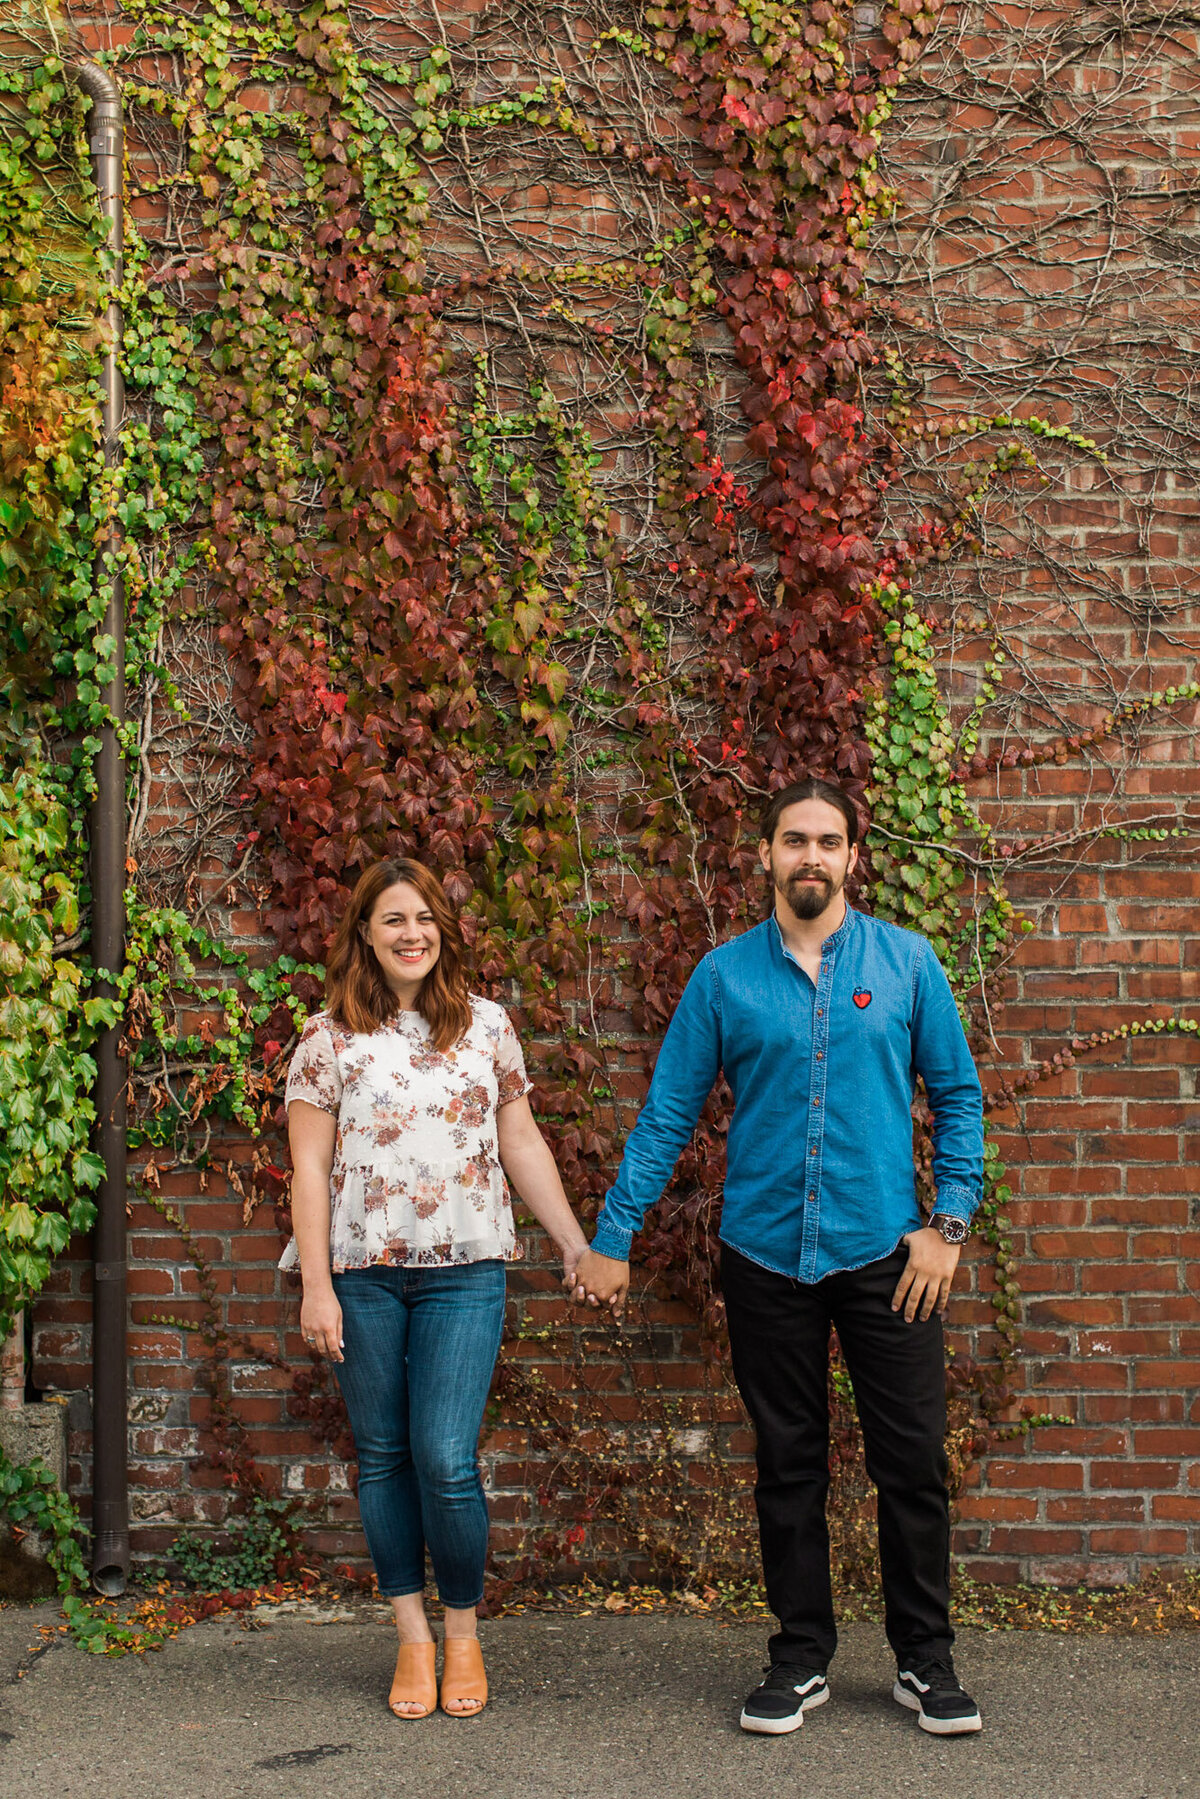 Urban engagement photos in Ballard Seattle WA Colorful fall photo with ivy growing up brick wall by Joanna Monger Photography